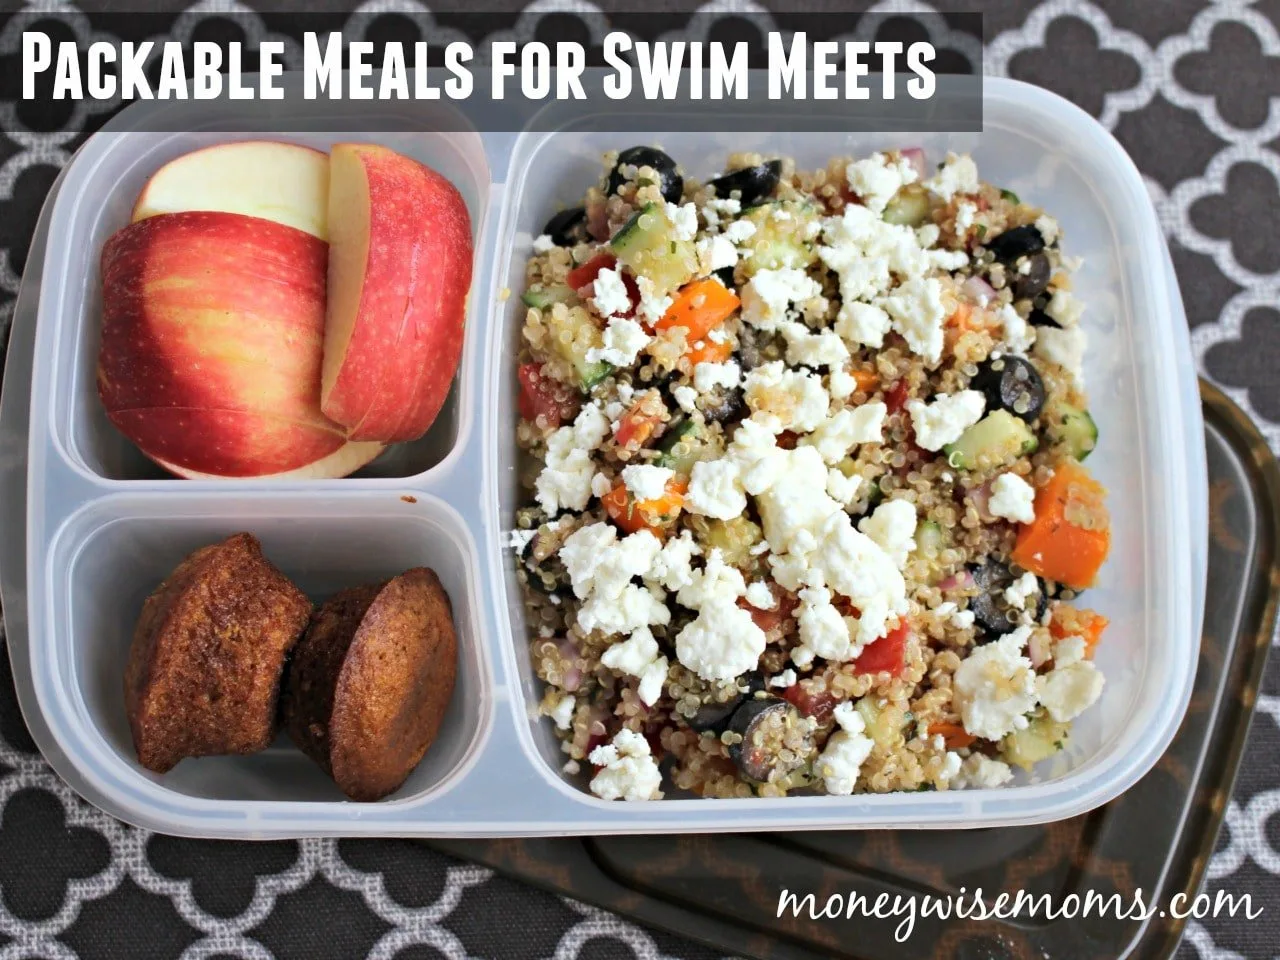 Packable Meals for Swim Meets | healthy family meals that you can pack in a lunchbox or cooler for swim meet dinners